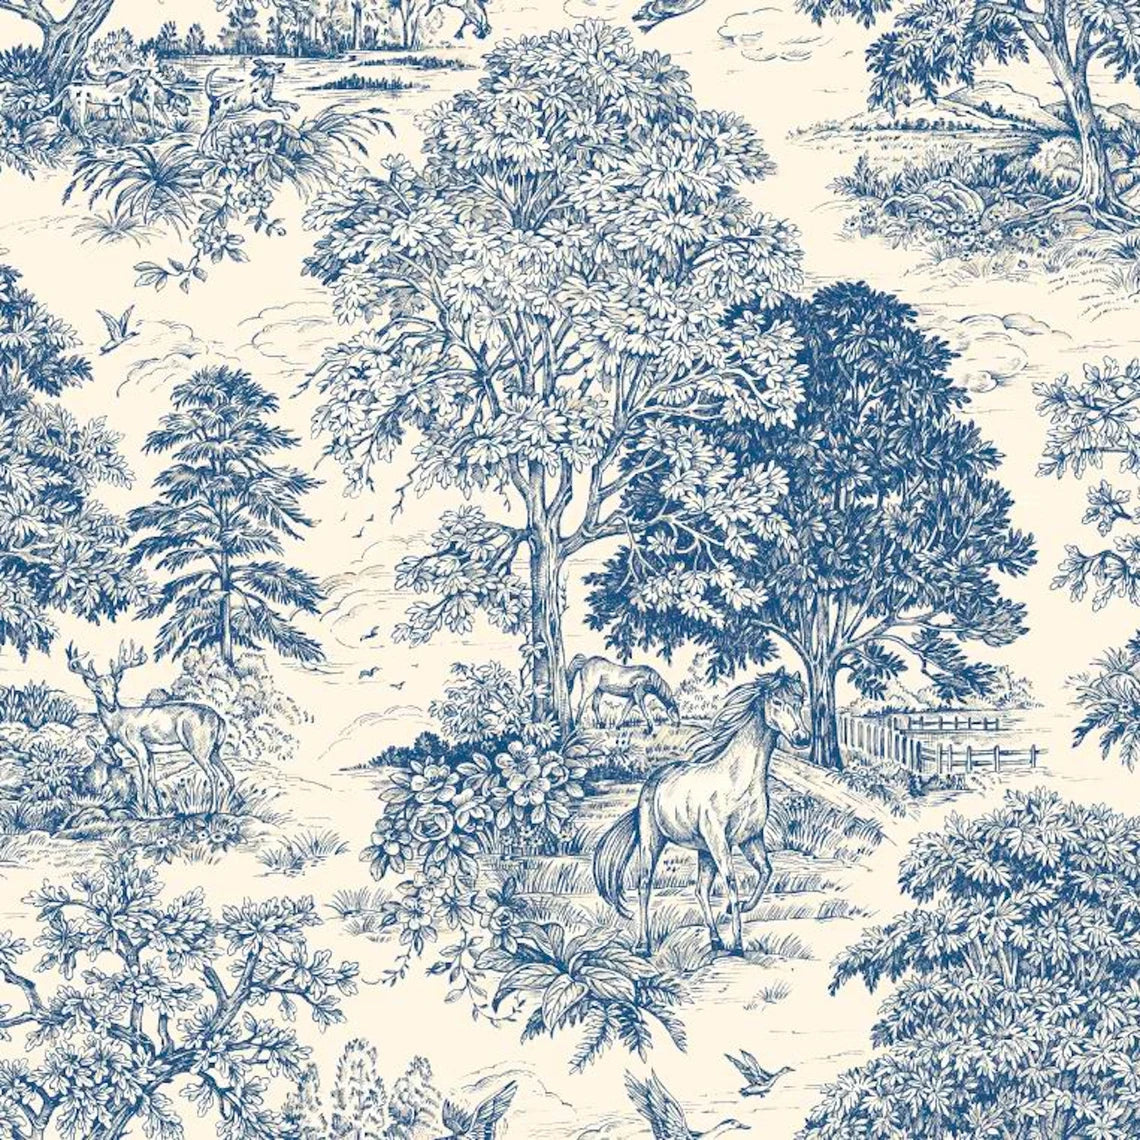 rod pocket curtain panels pair in Yellowstone Bluebell Blue Country Toile- Horses, Deer, Dogs- Large Scale